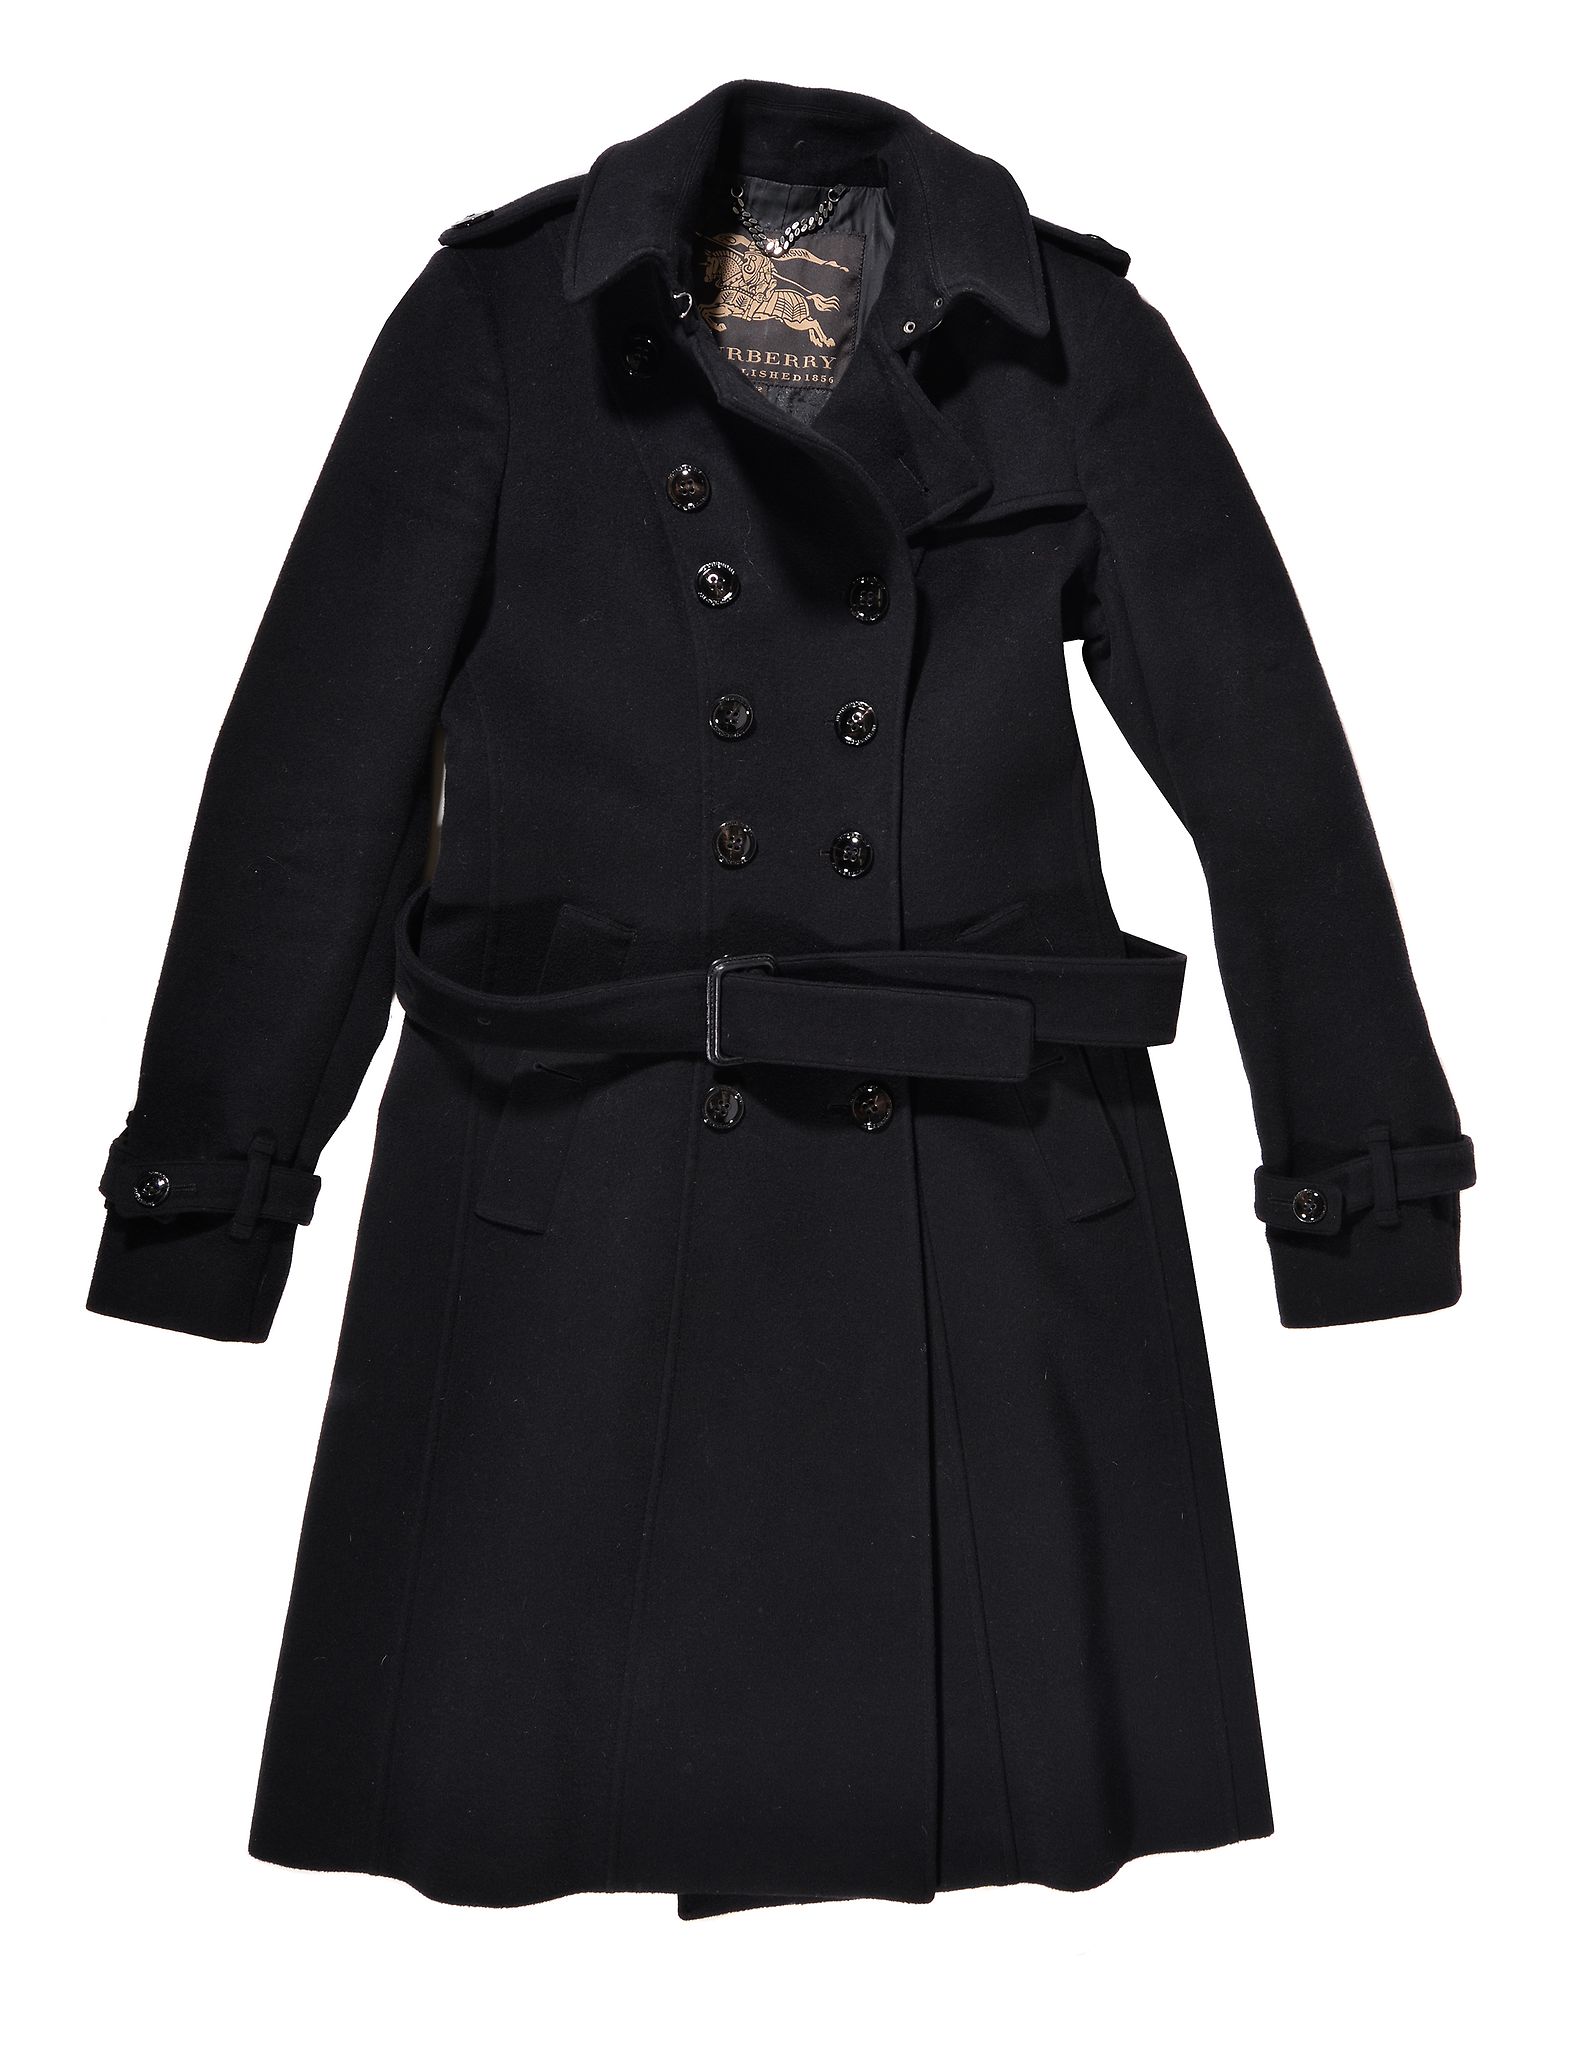 Burberry, a black wool and cashmere coat, with a double breasted button down front and two front